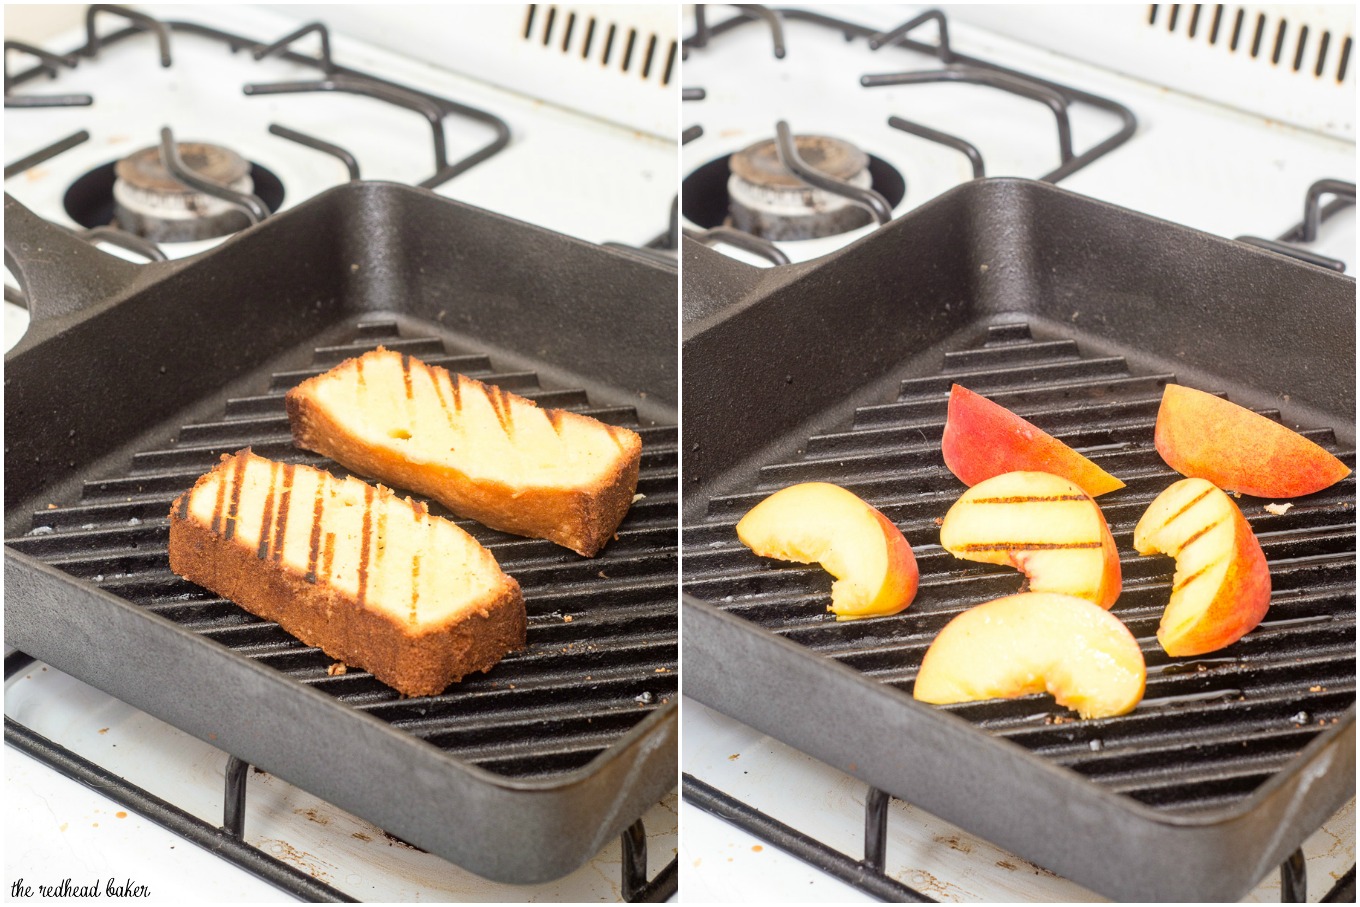 Grilled pound cake with peaches and mascarpone is a delicious summer dessert made right on the grill, the perfect ending to your cookout. #ProgressiveEats